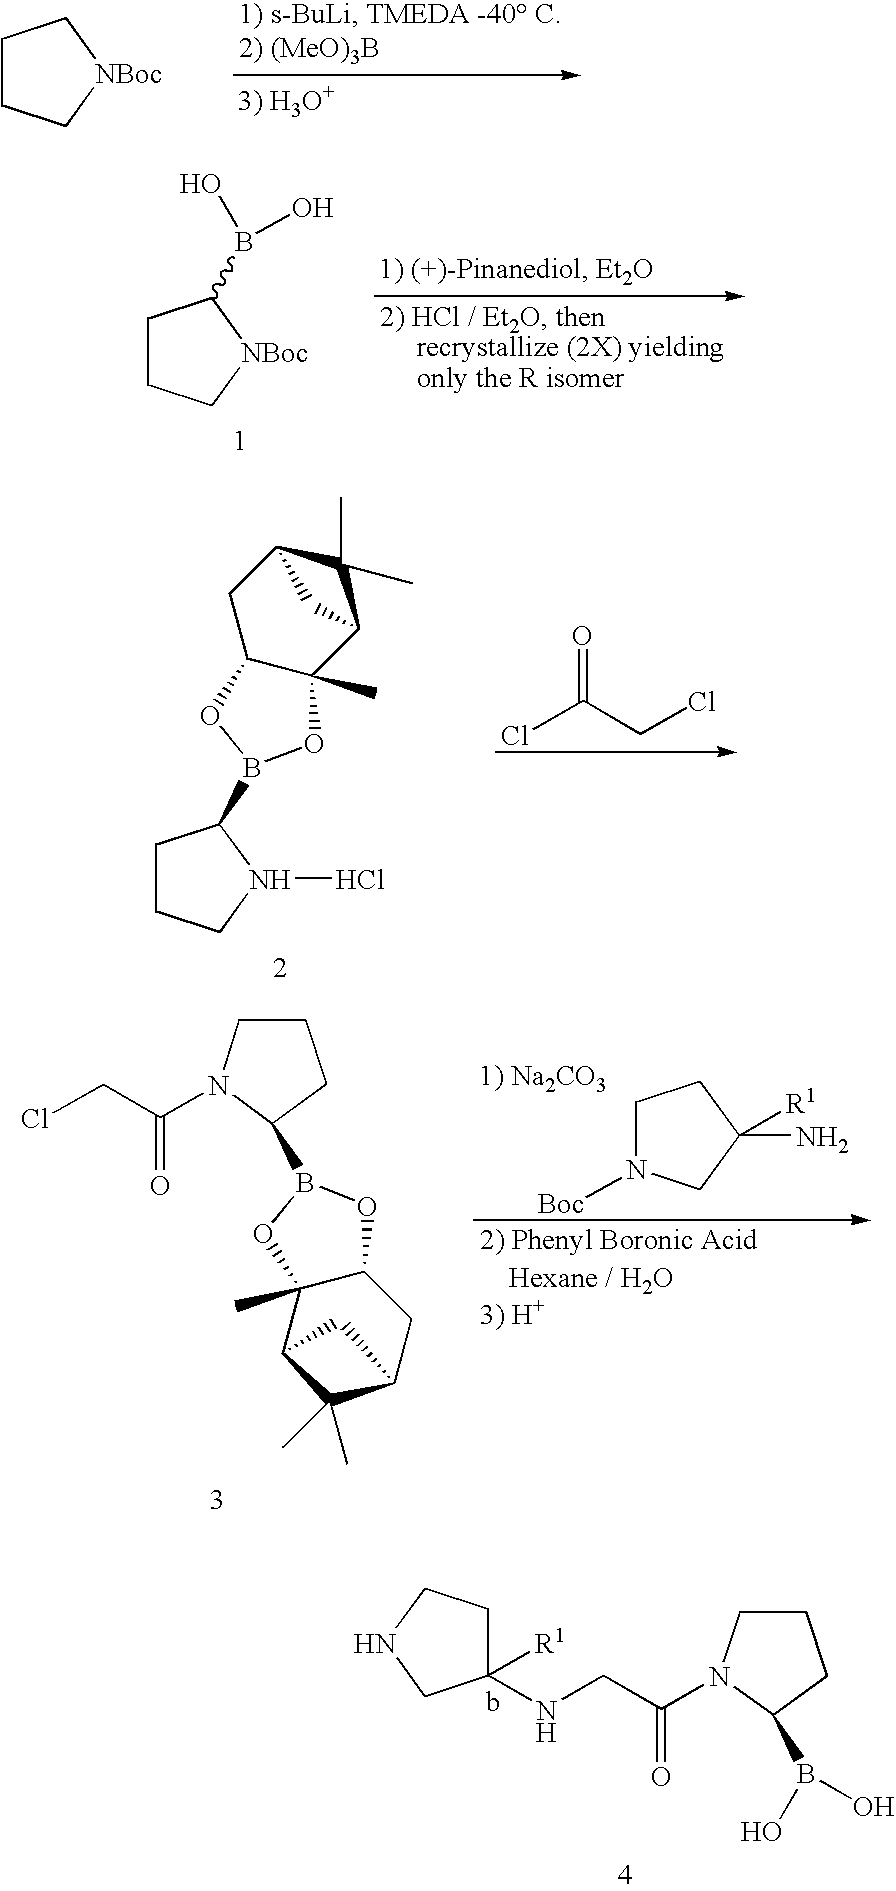 Pyrrolidine compounds and methods for selective inhibition of dipeptidyl peptidase-iv